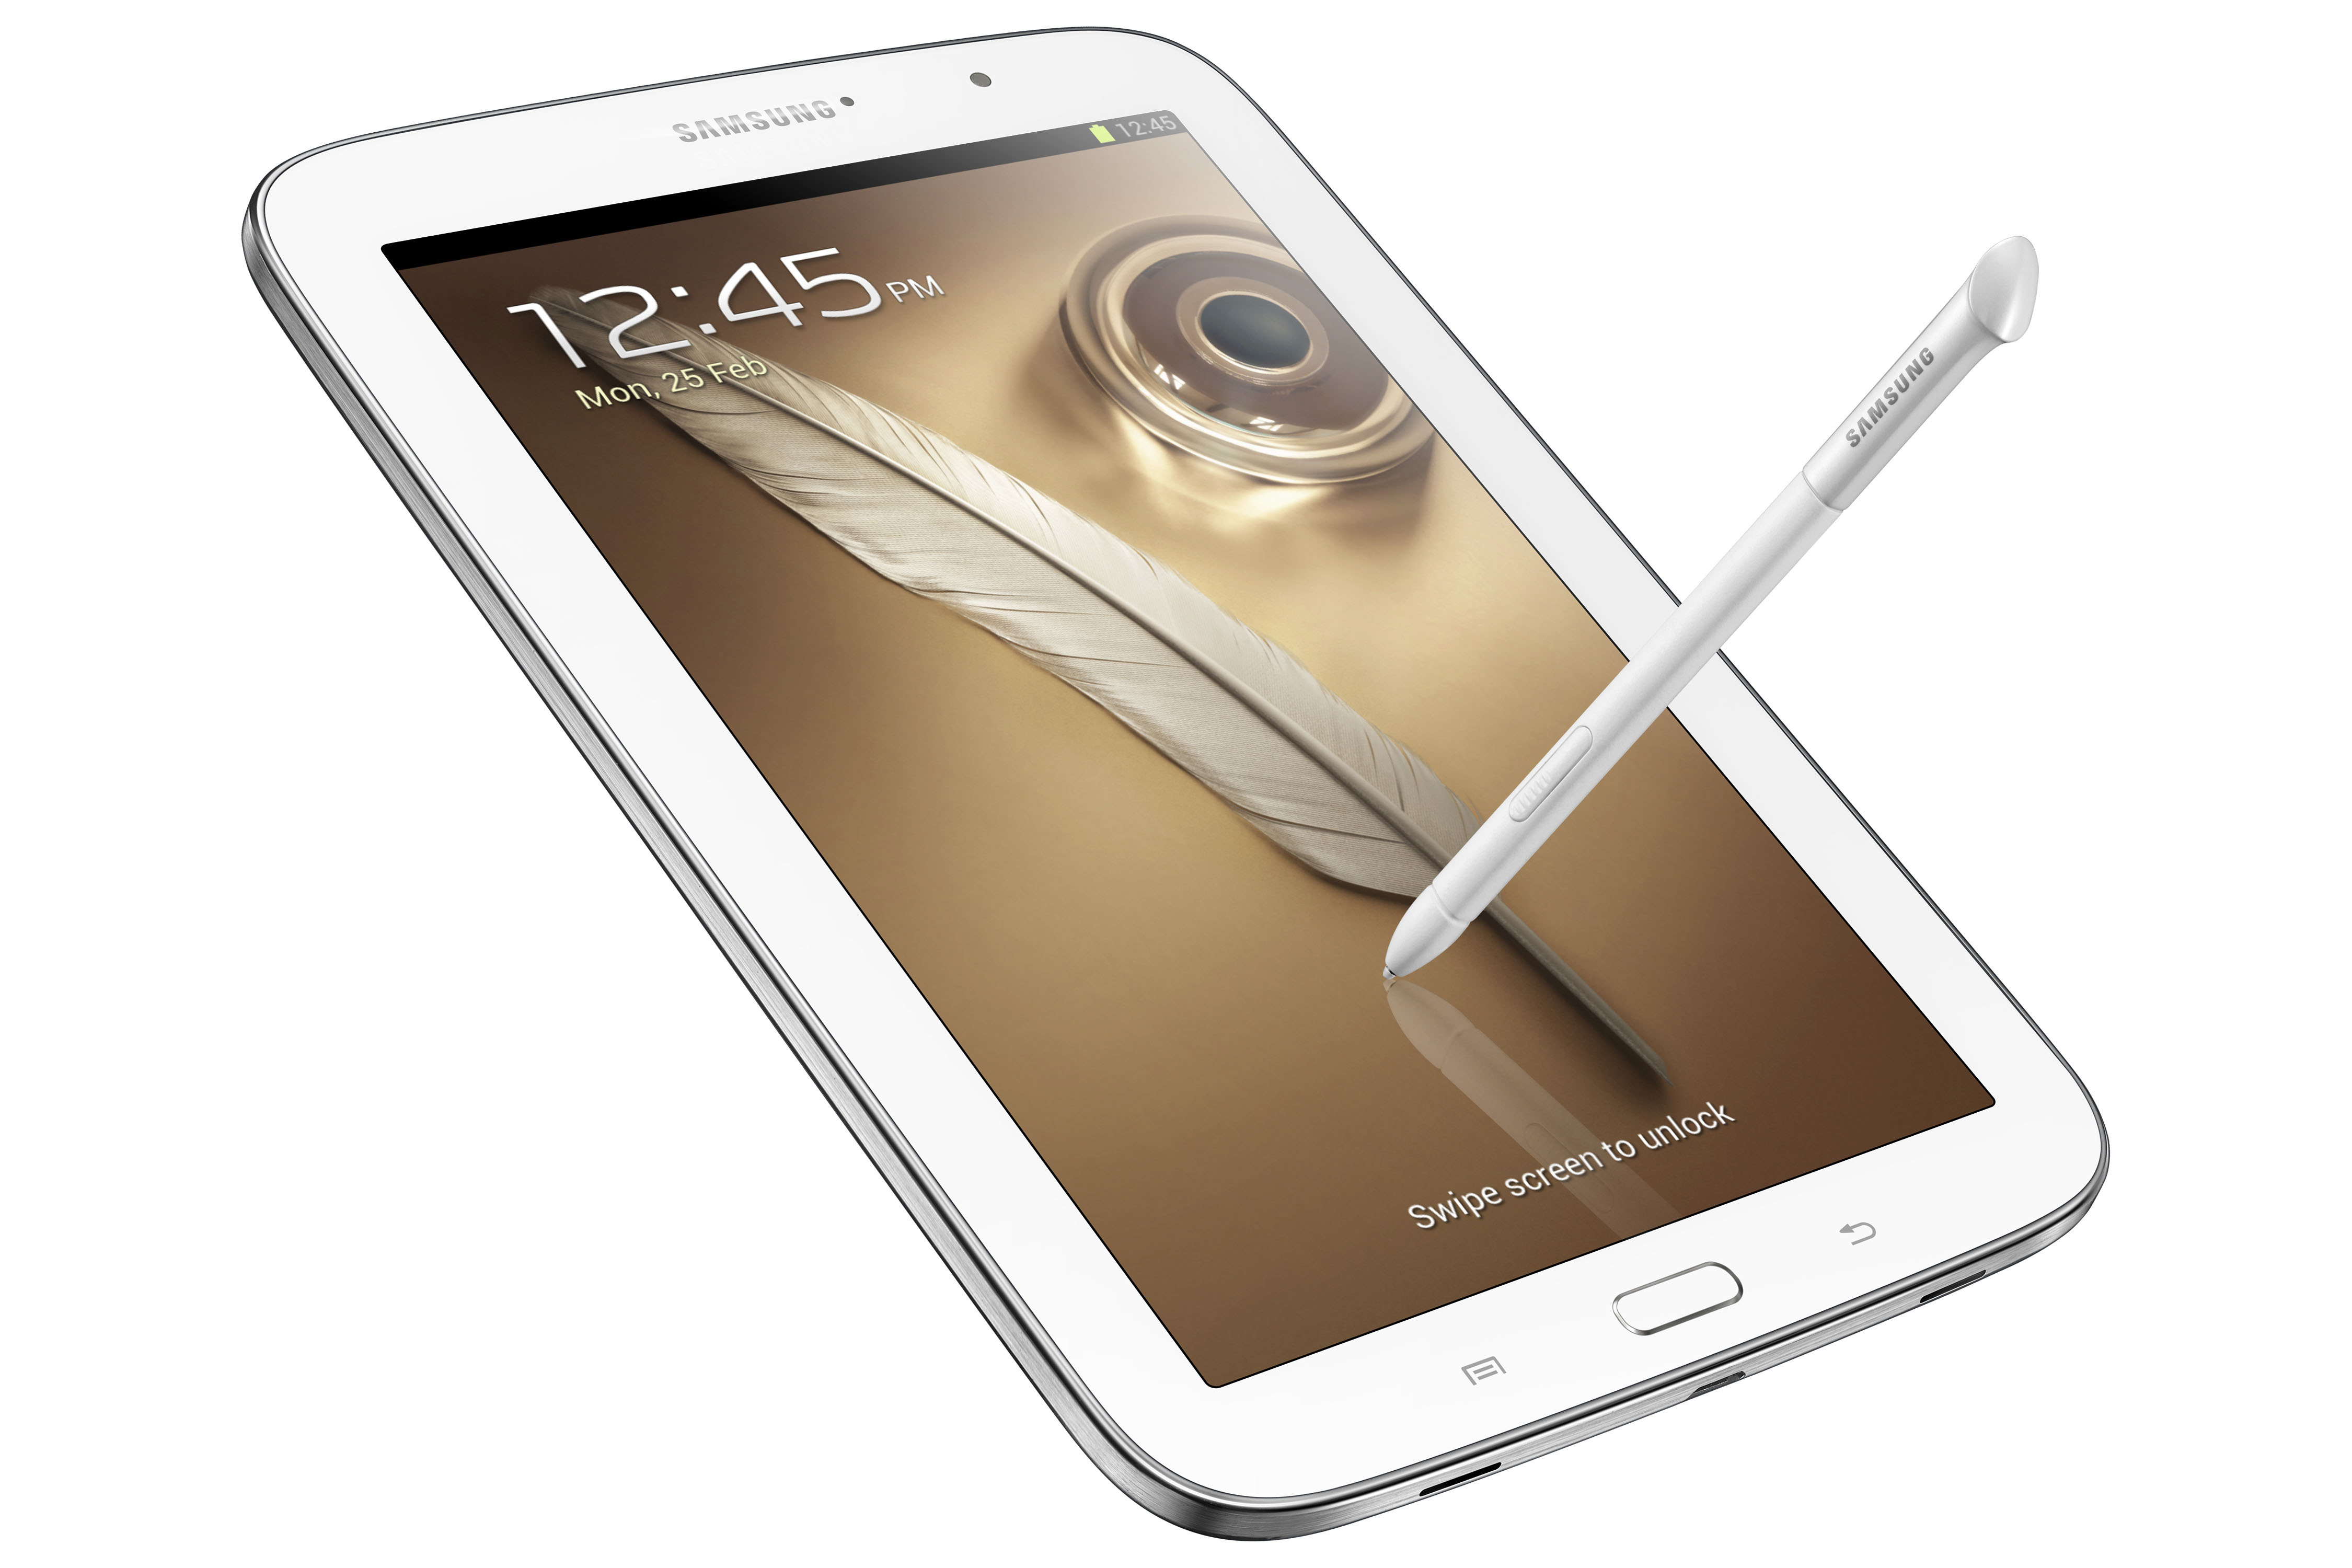 behandeling Heb geleerd verdediging Samsung Brings Power and Portability to the U.S. with the Galaxy Note® 8.0  Tablet | Business Wire